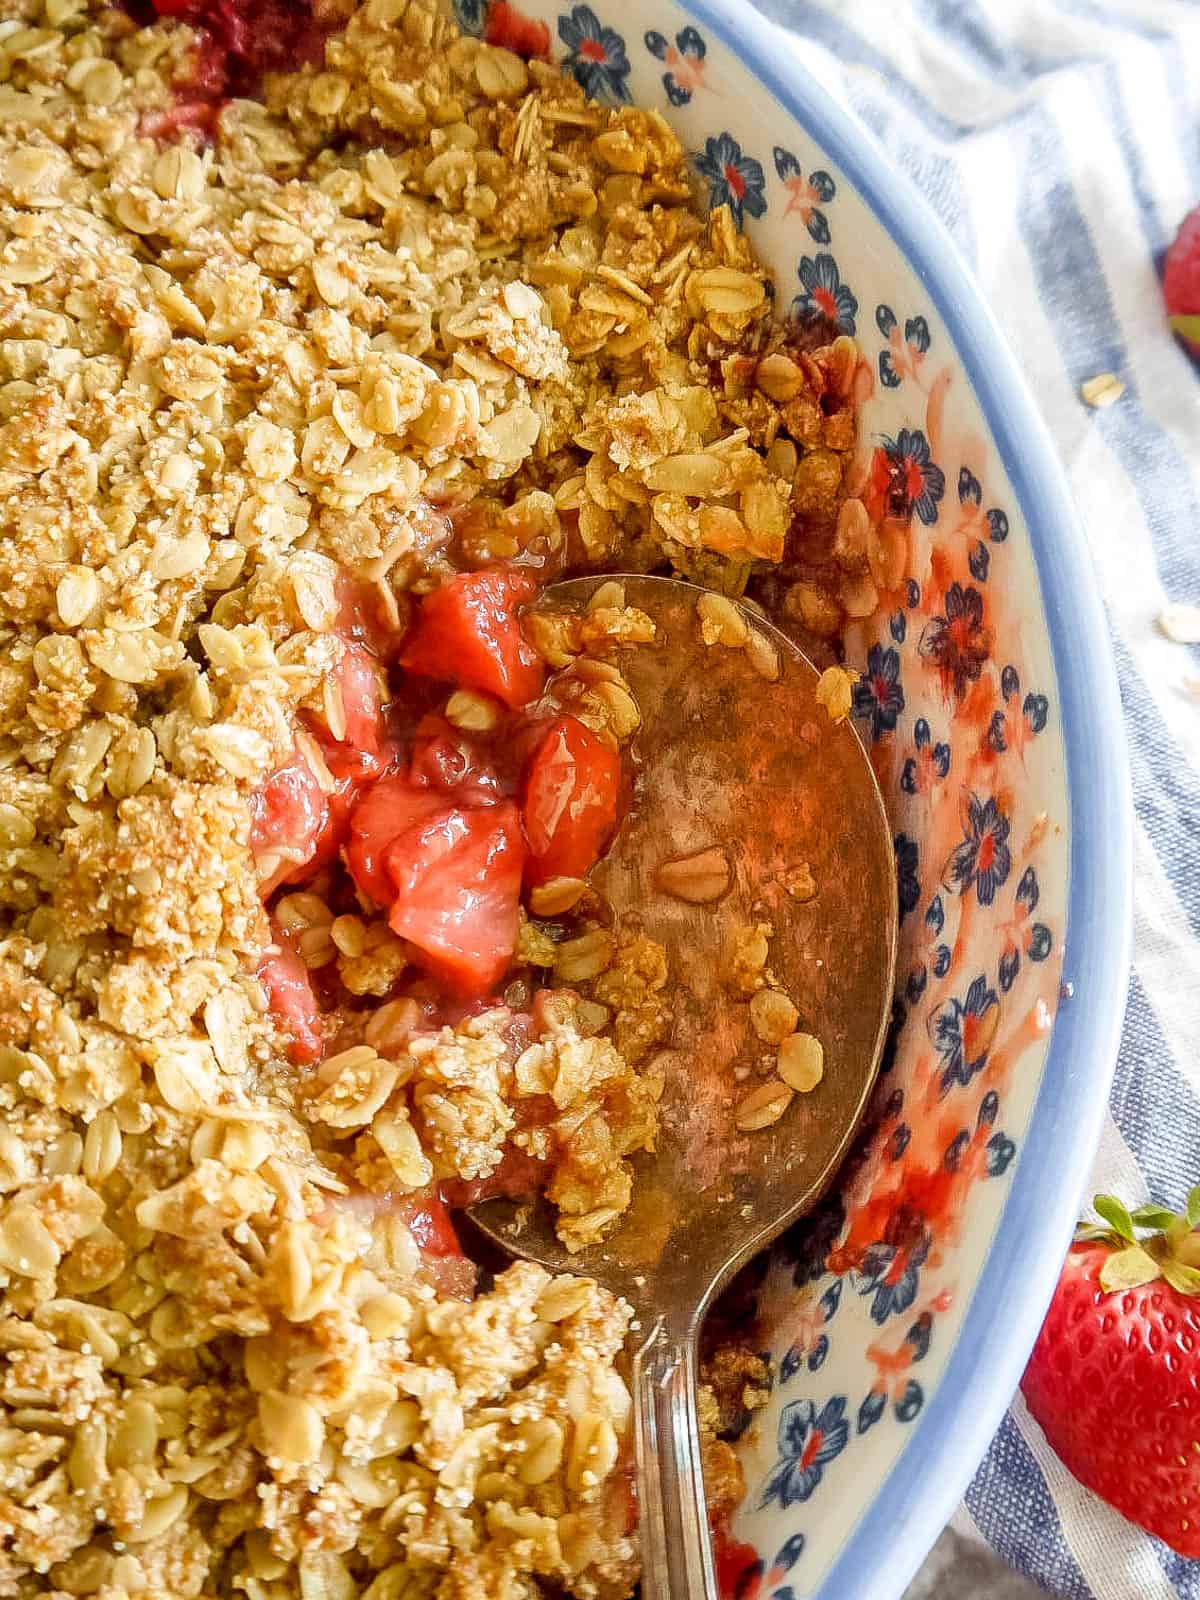 A large spoon filled with gluten-free strawberry crisp.